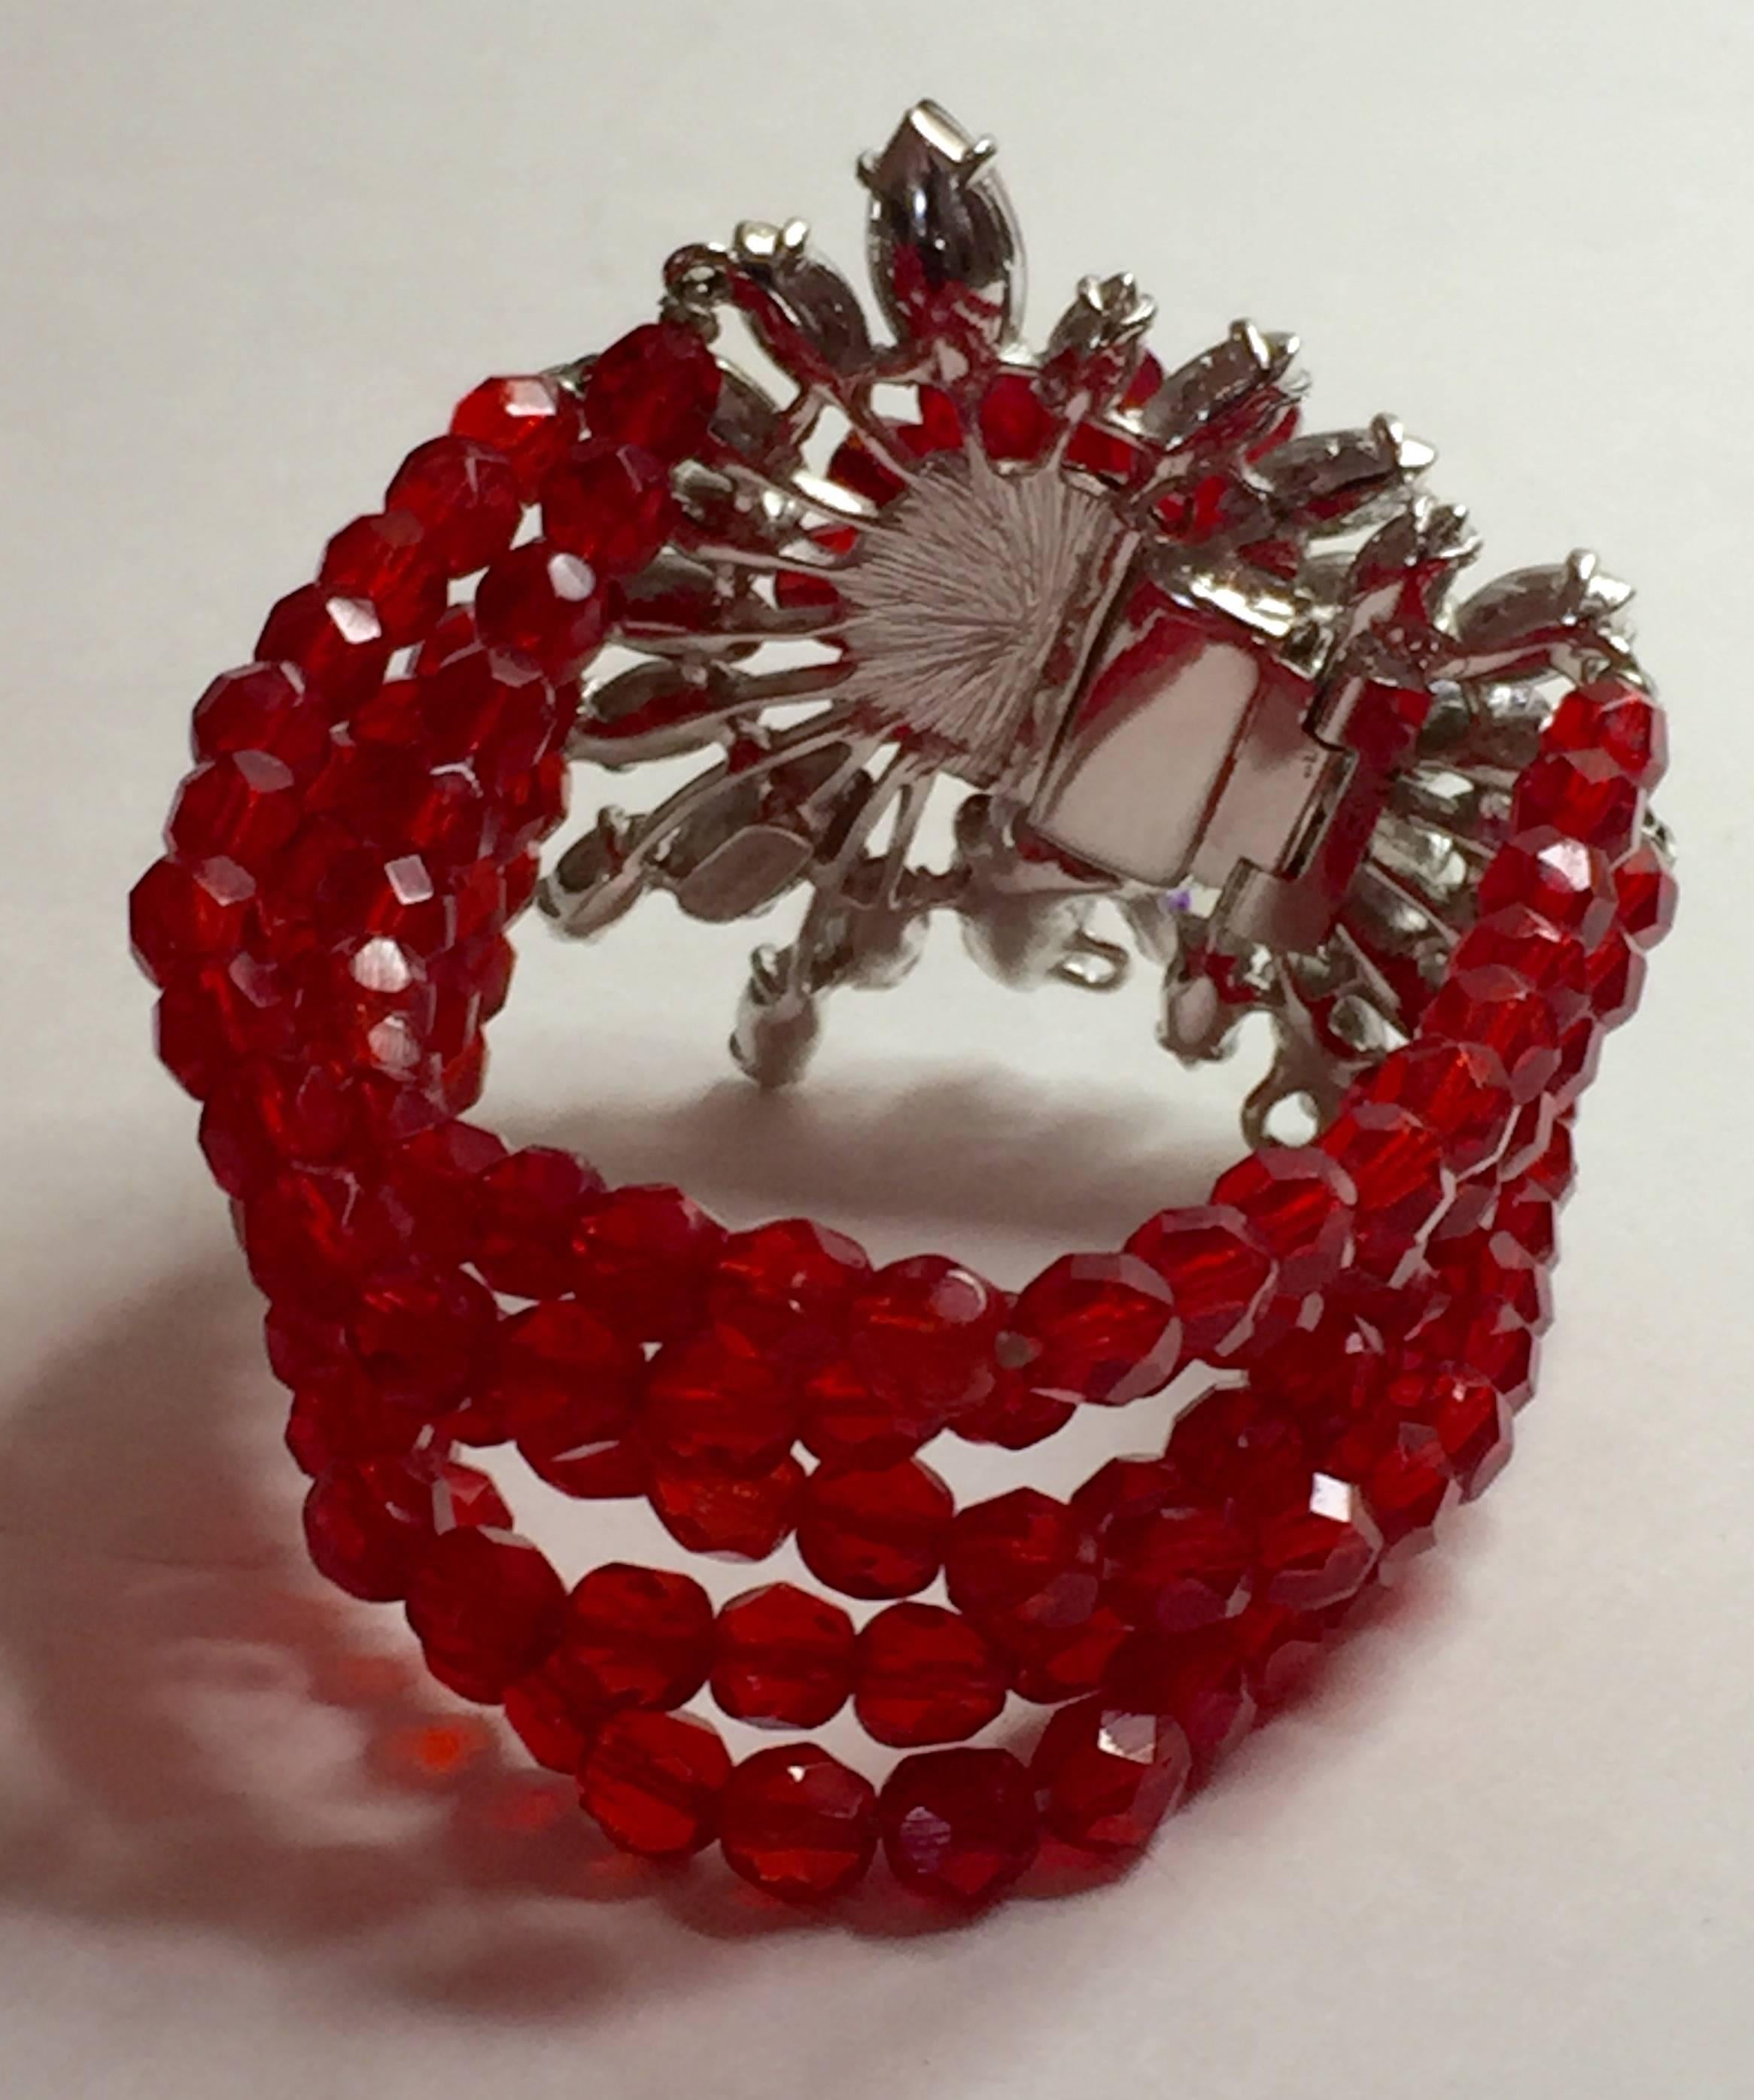 This SCHIAPARELLI  5-strand Faux Ruby Bracelet with Elaborate LUXE Stonework Clasp is a magnificent piece of designer vintage costume jewelry. Rhodium plated elaborate clasp is embellished with aurora borealis marquis shaped stonework and faux ruby